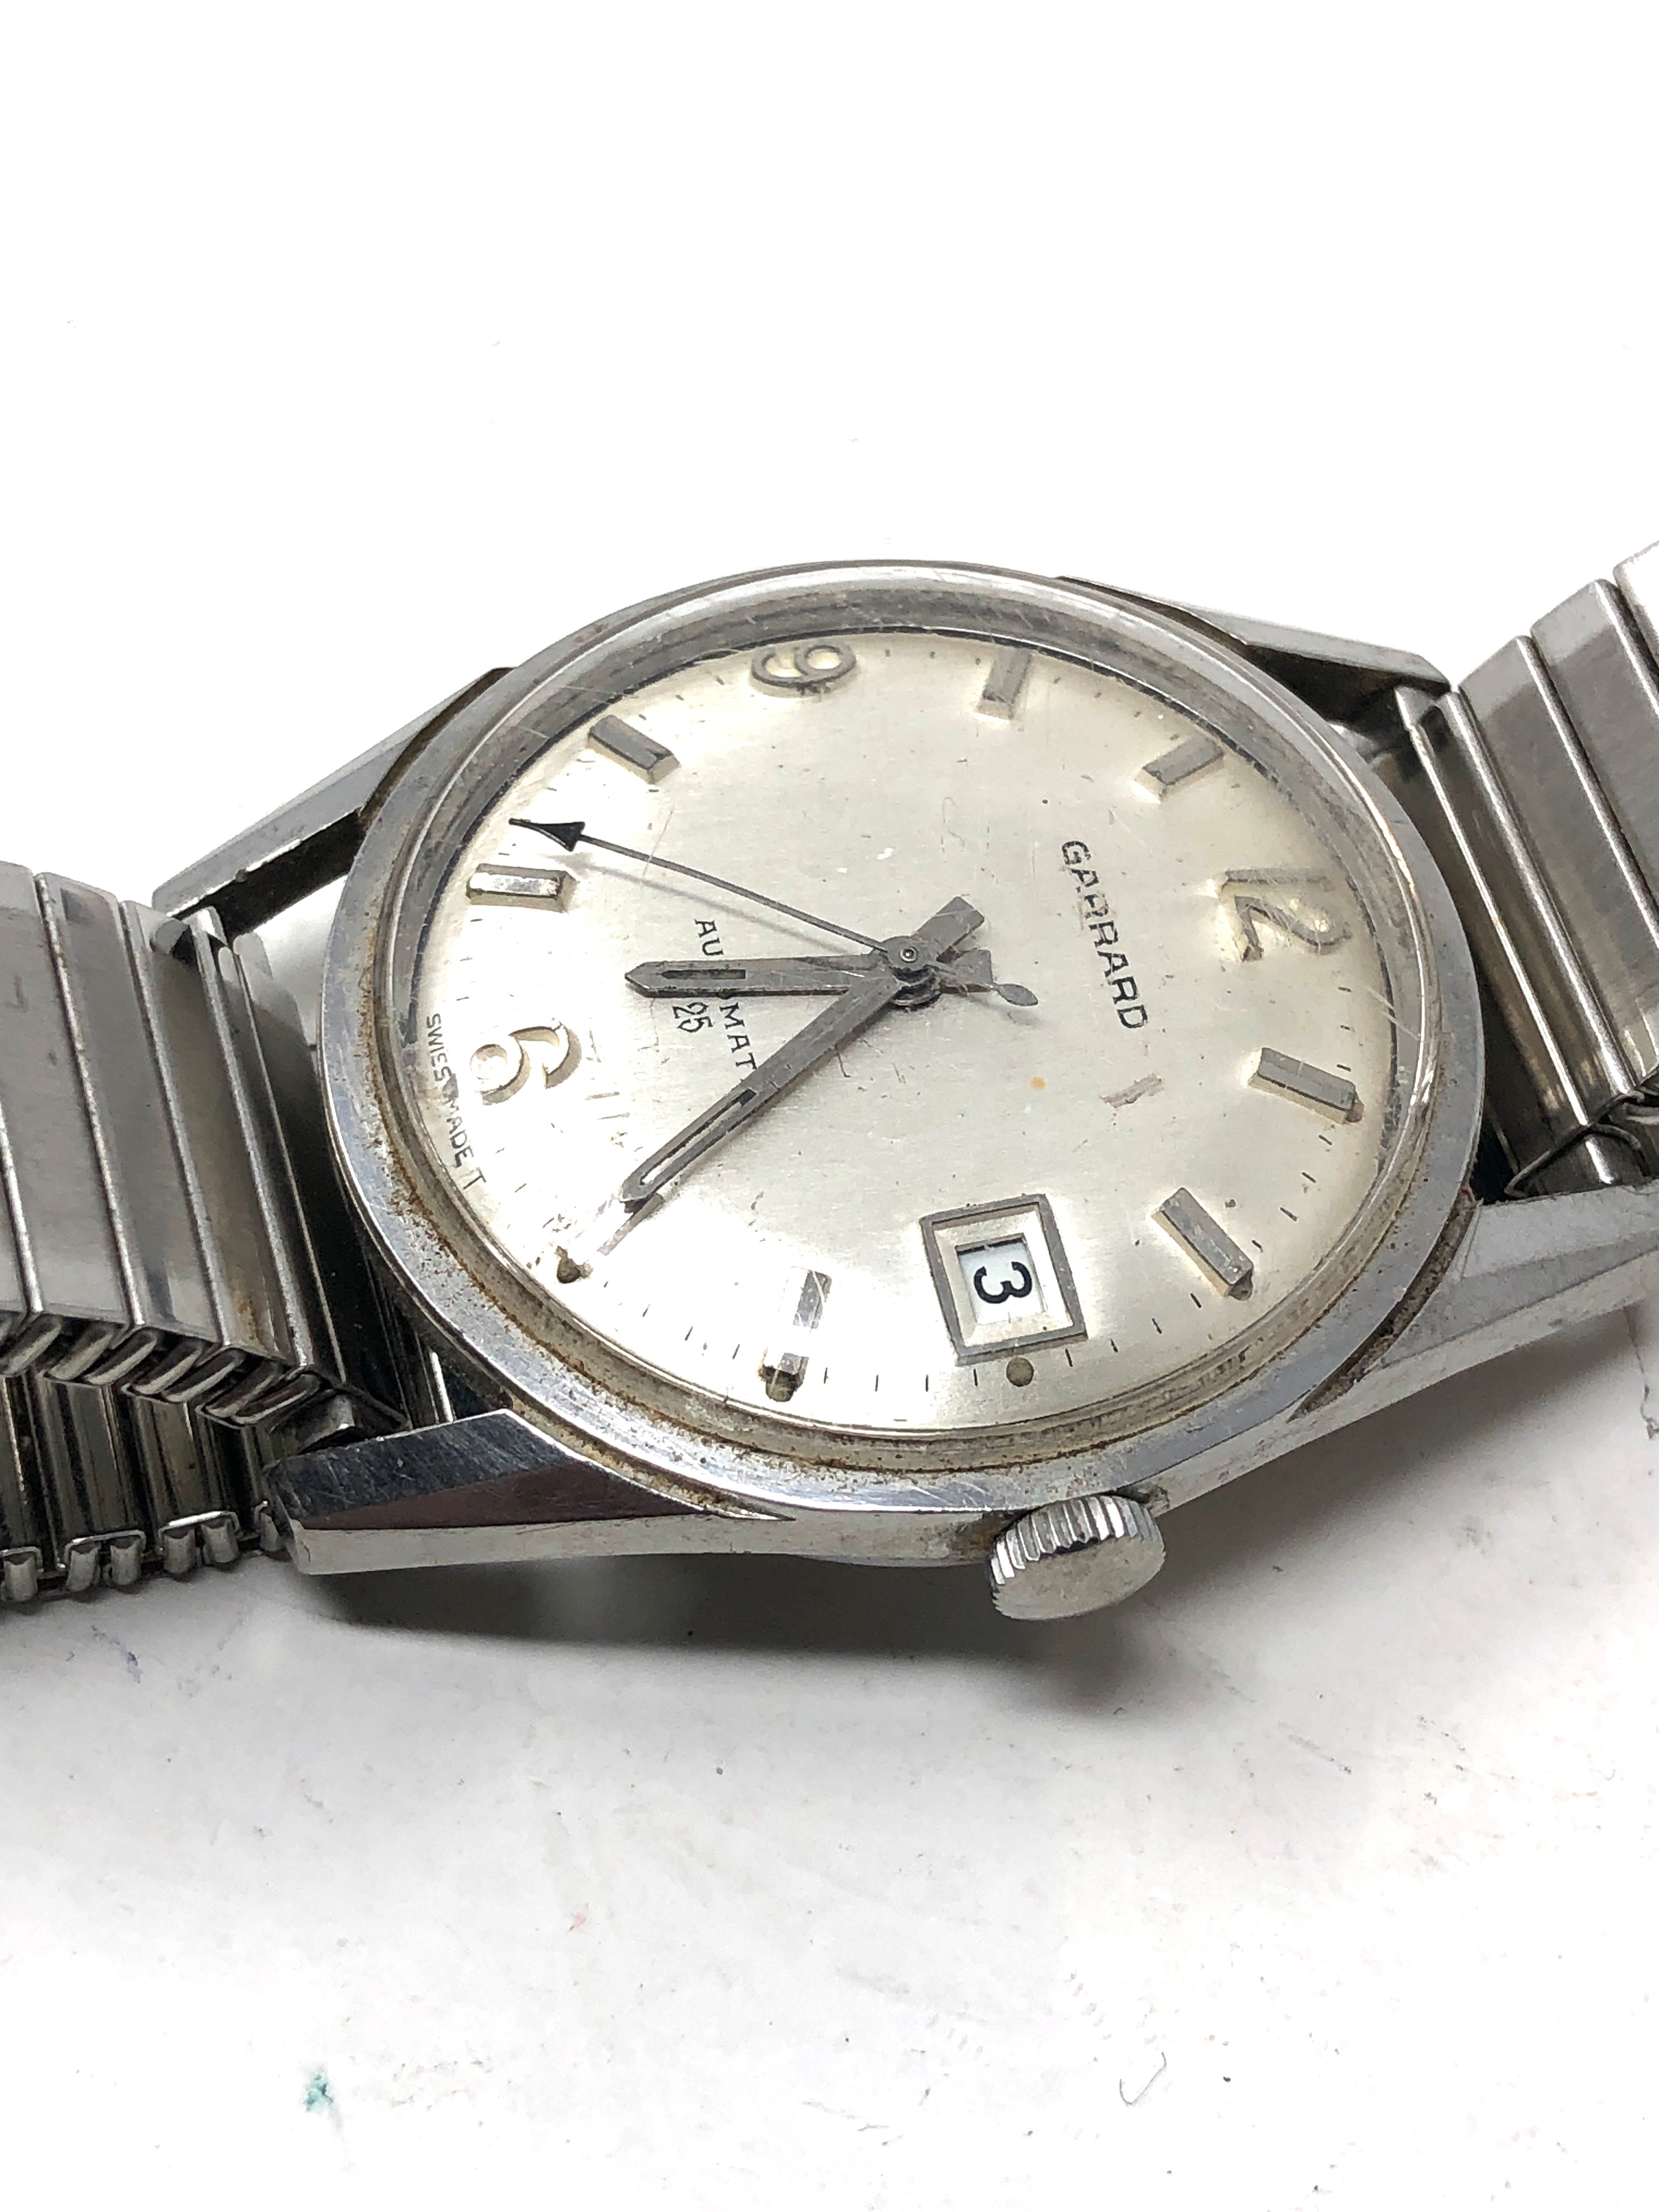 Vintage gents garrard automatic wristwatch the watch is ticking - Image 2 of 3